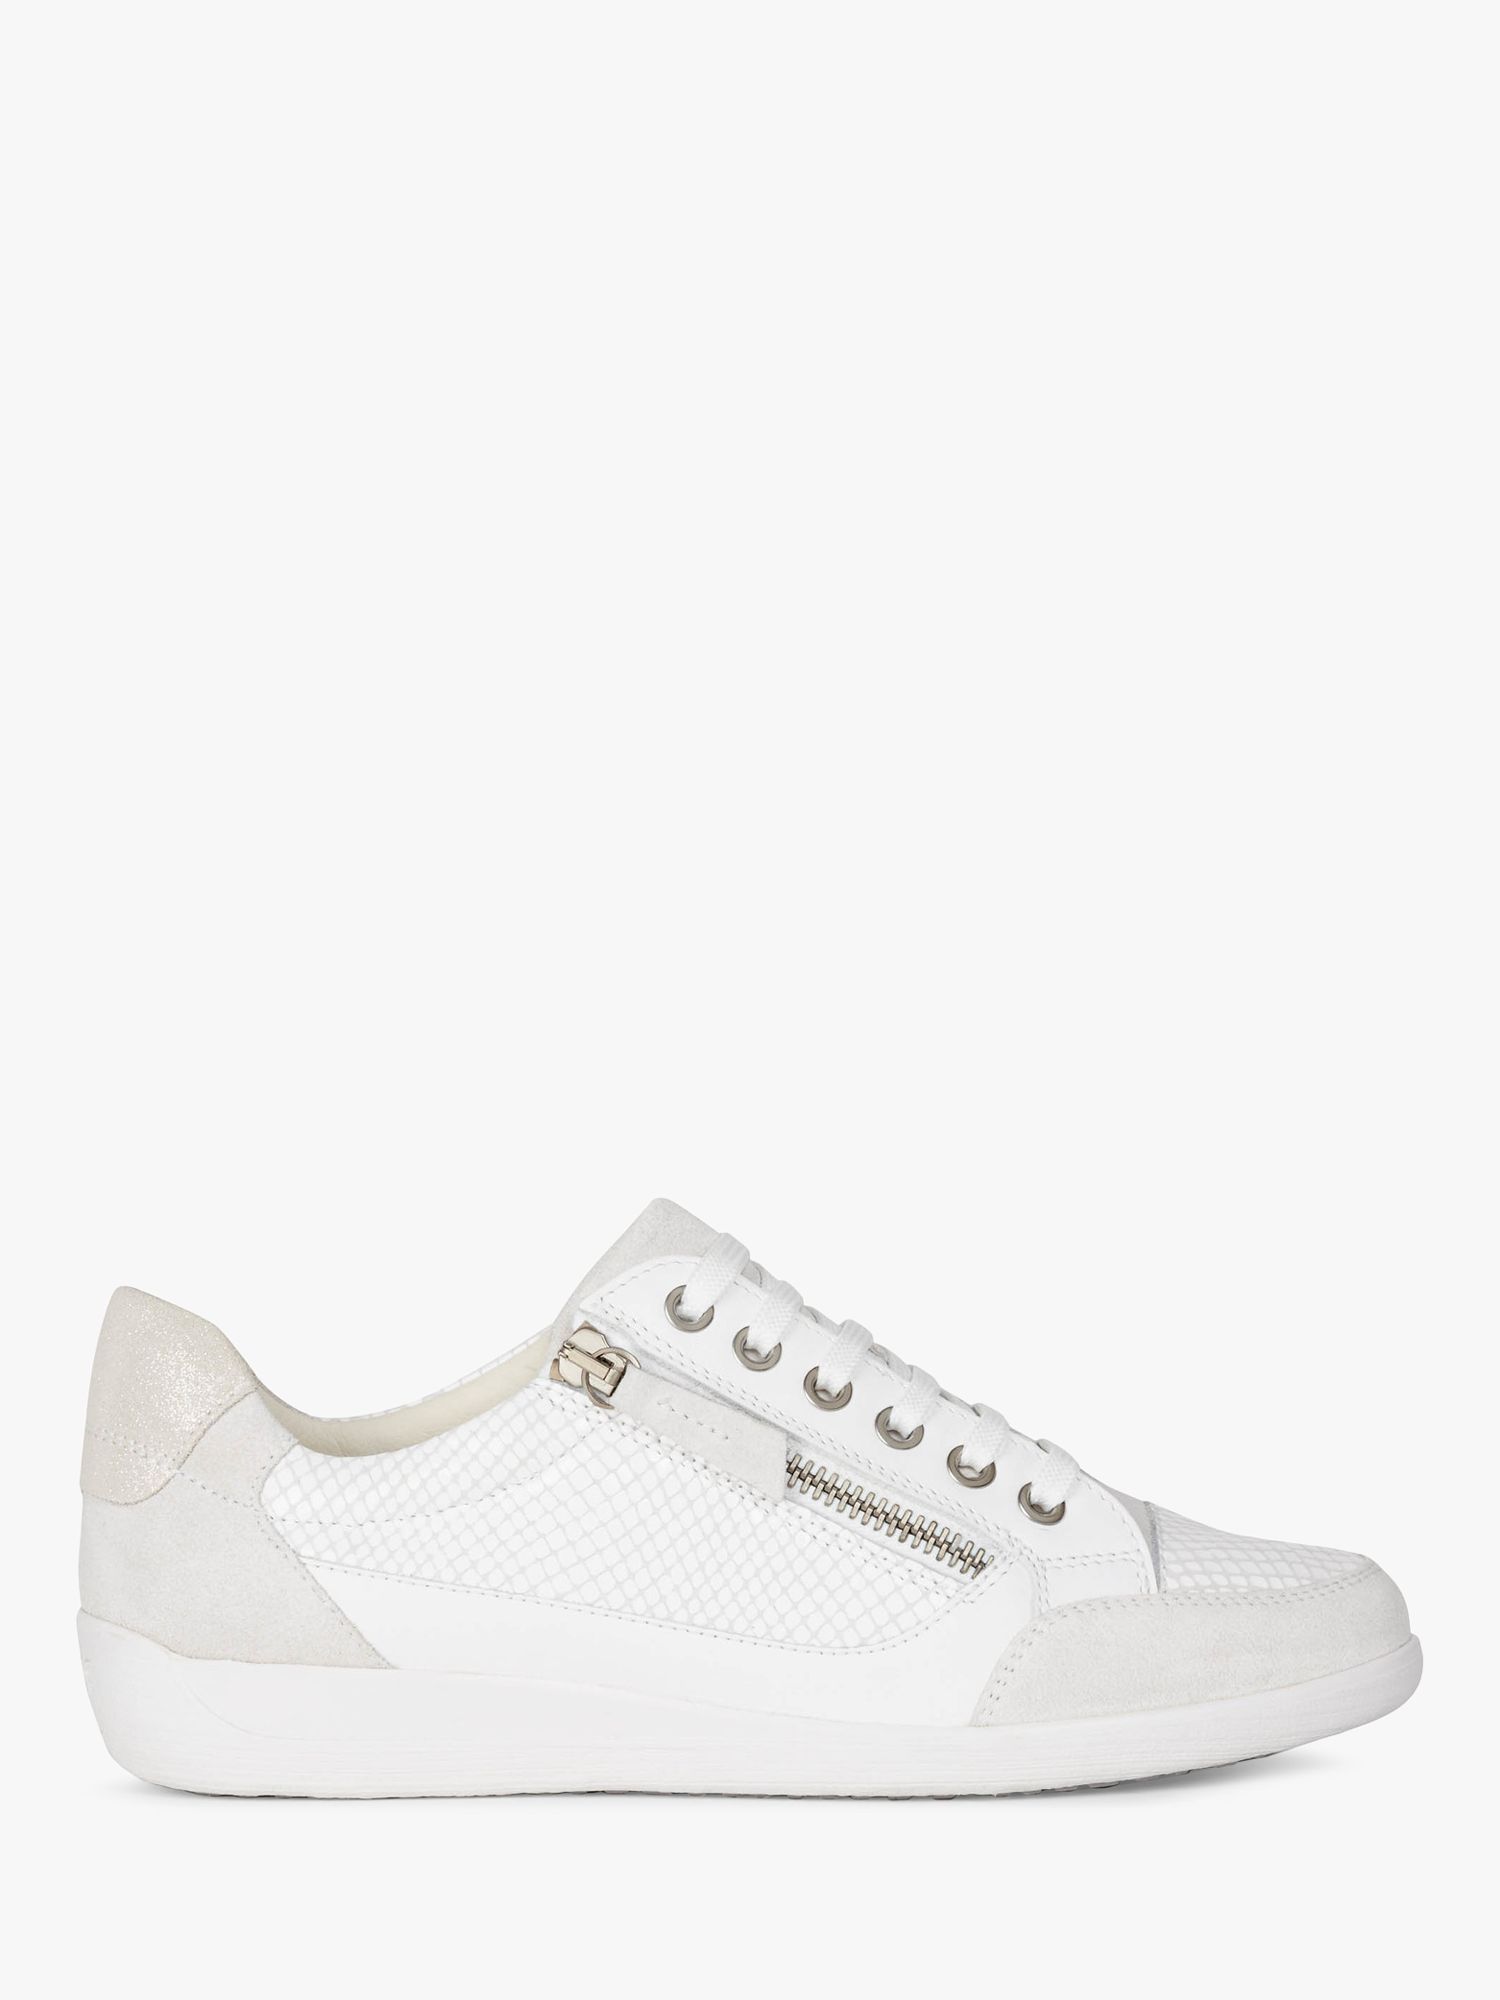 Geox Myria Suede and Leather Wide Fit Low Top Trainers, Off White/White